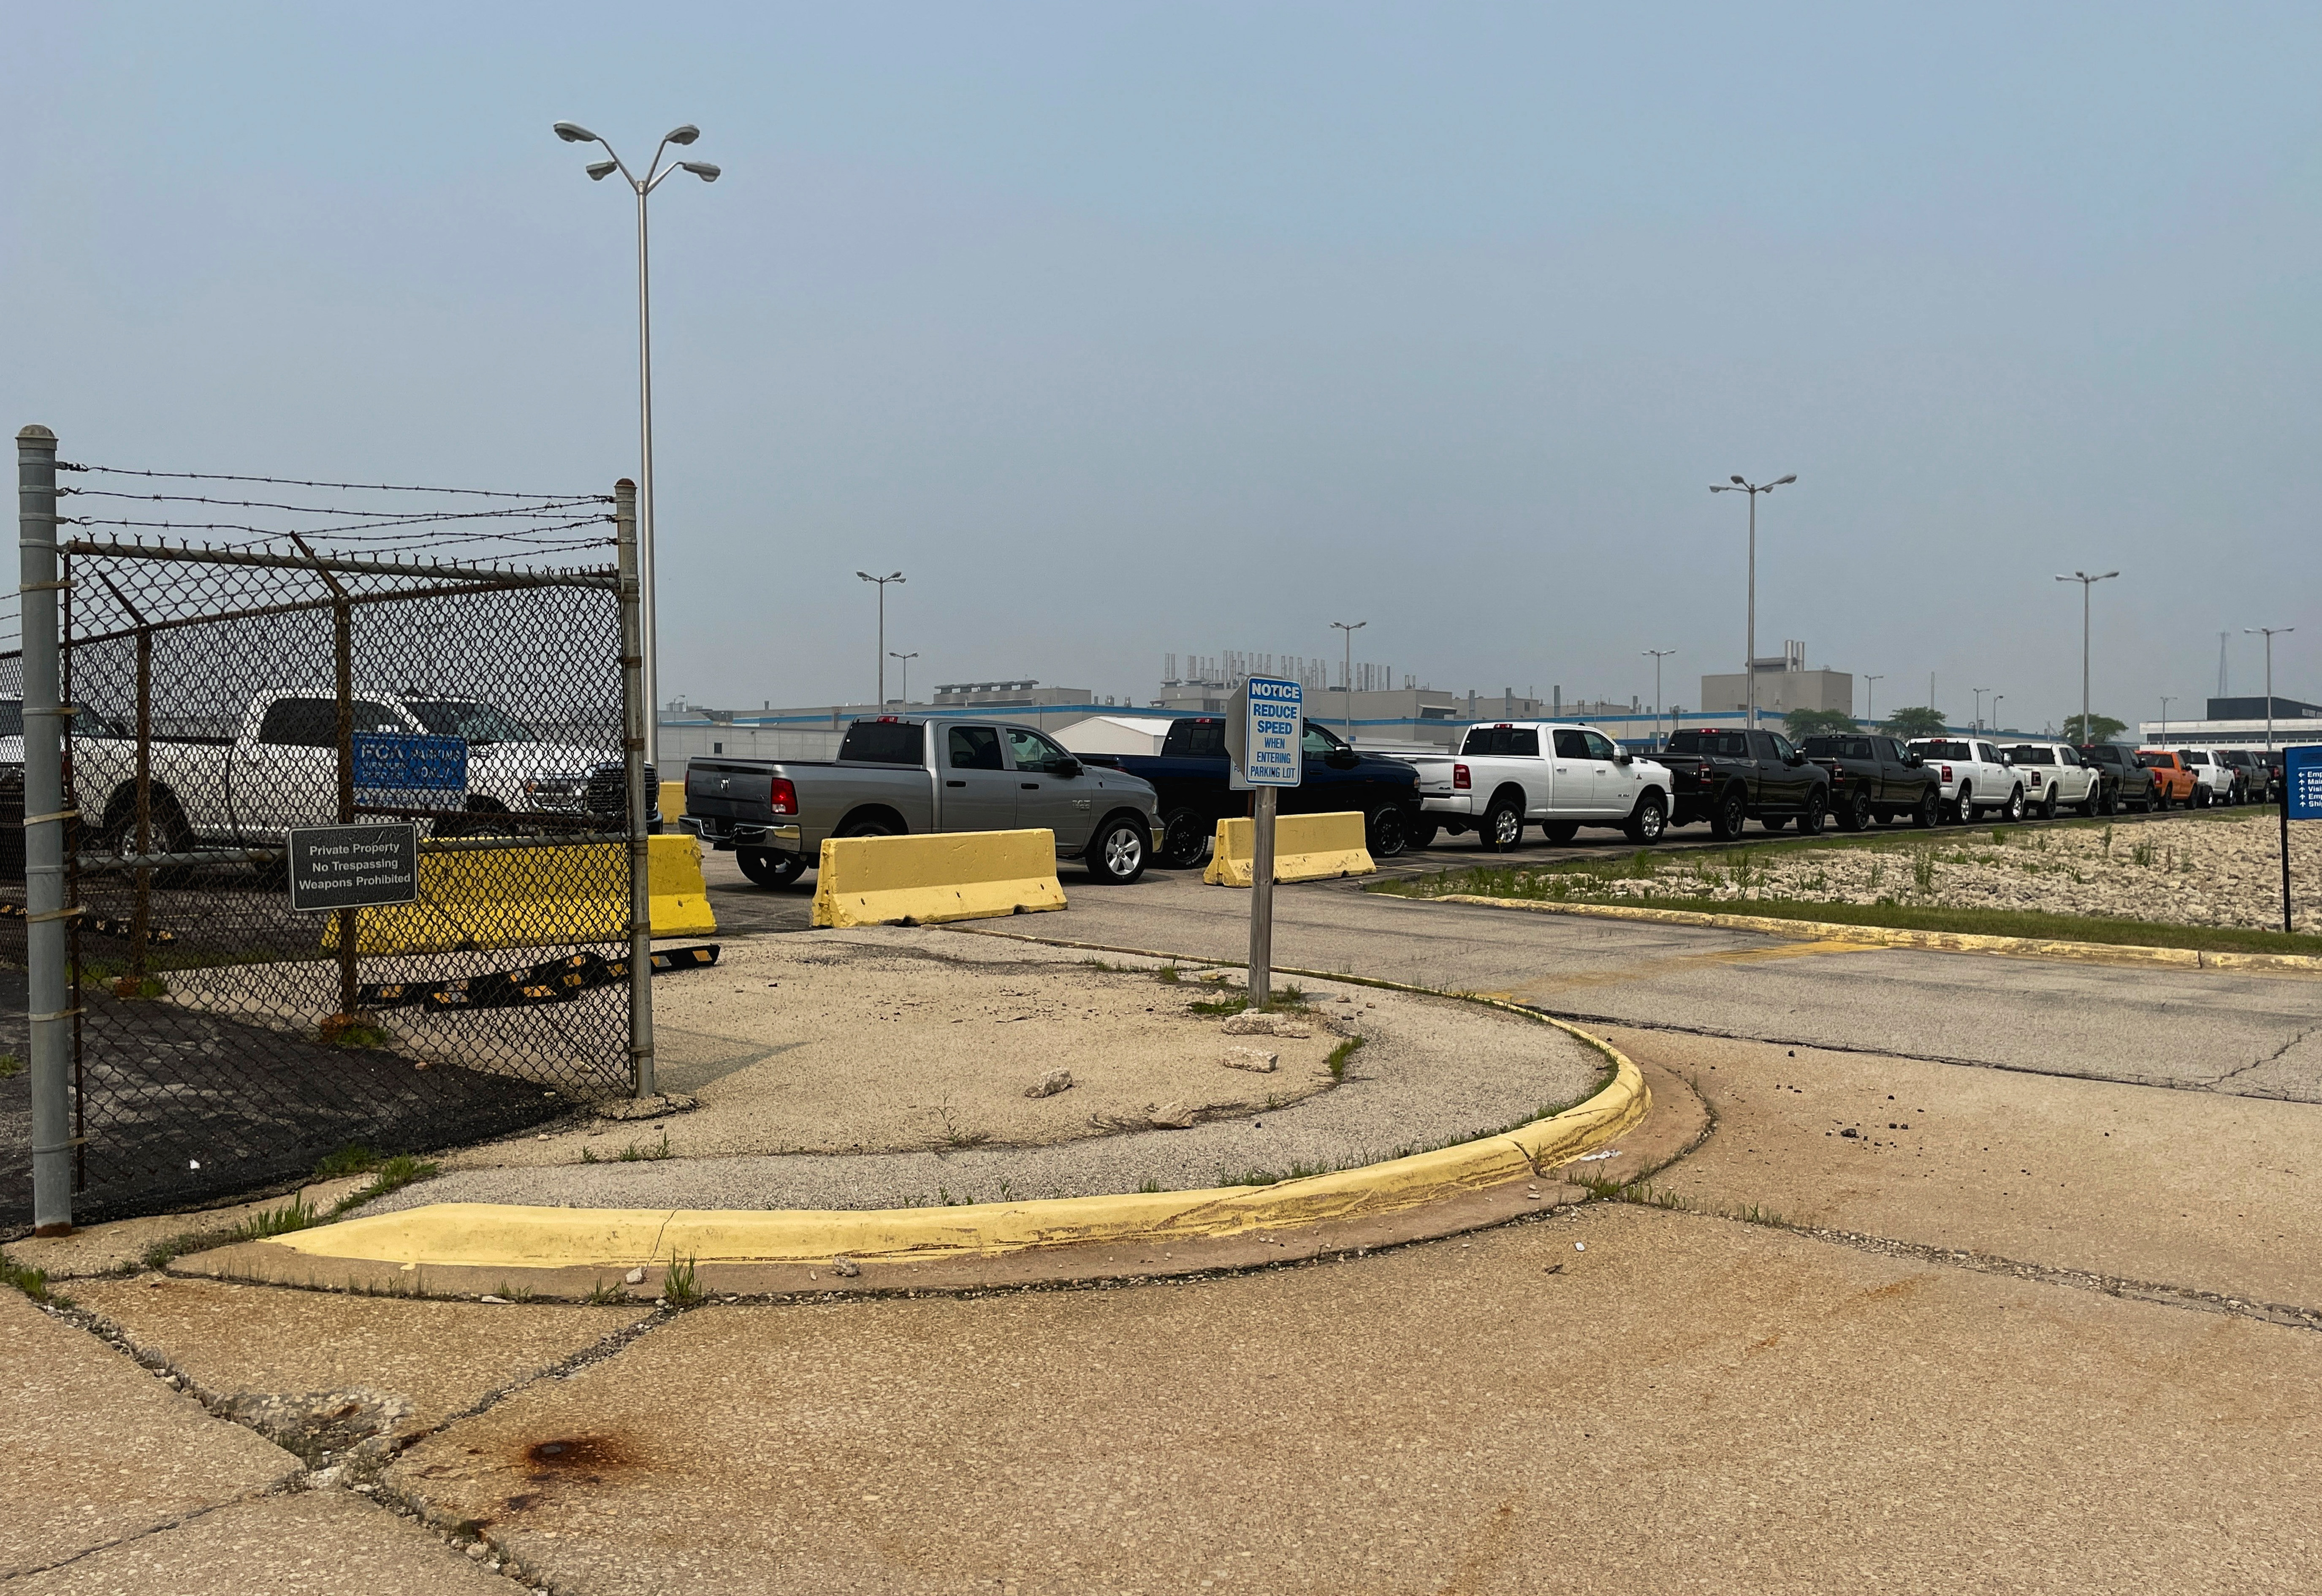 Opinion: How to tackle Detroit's empty parking lots